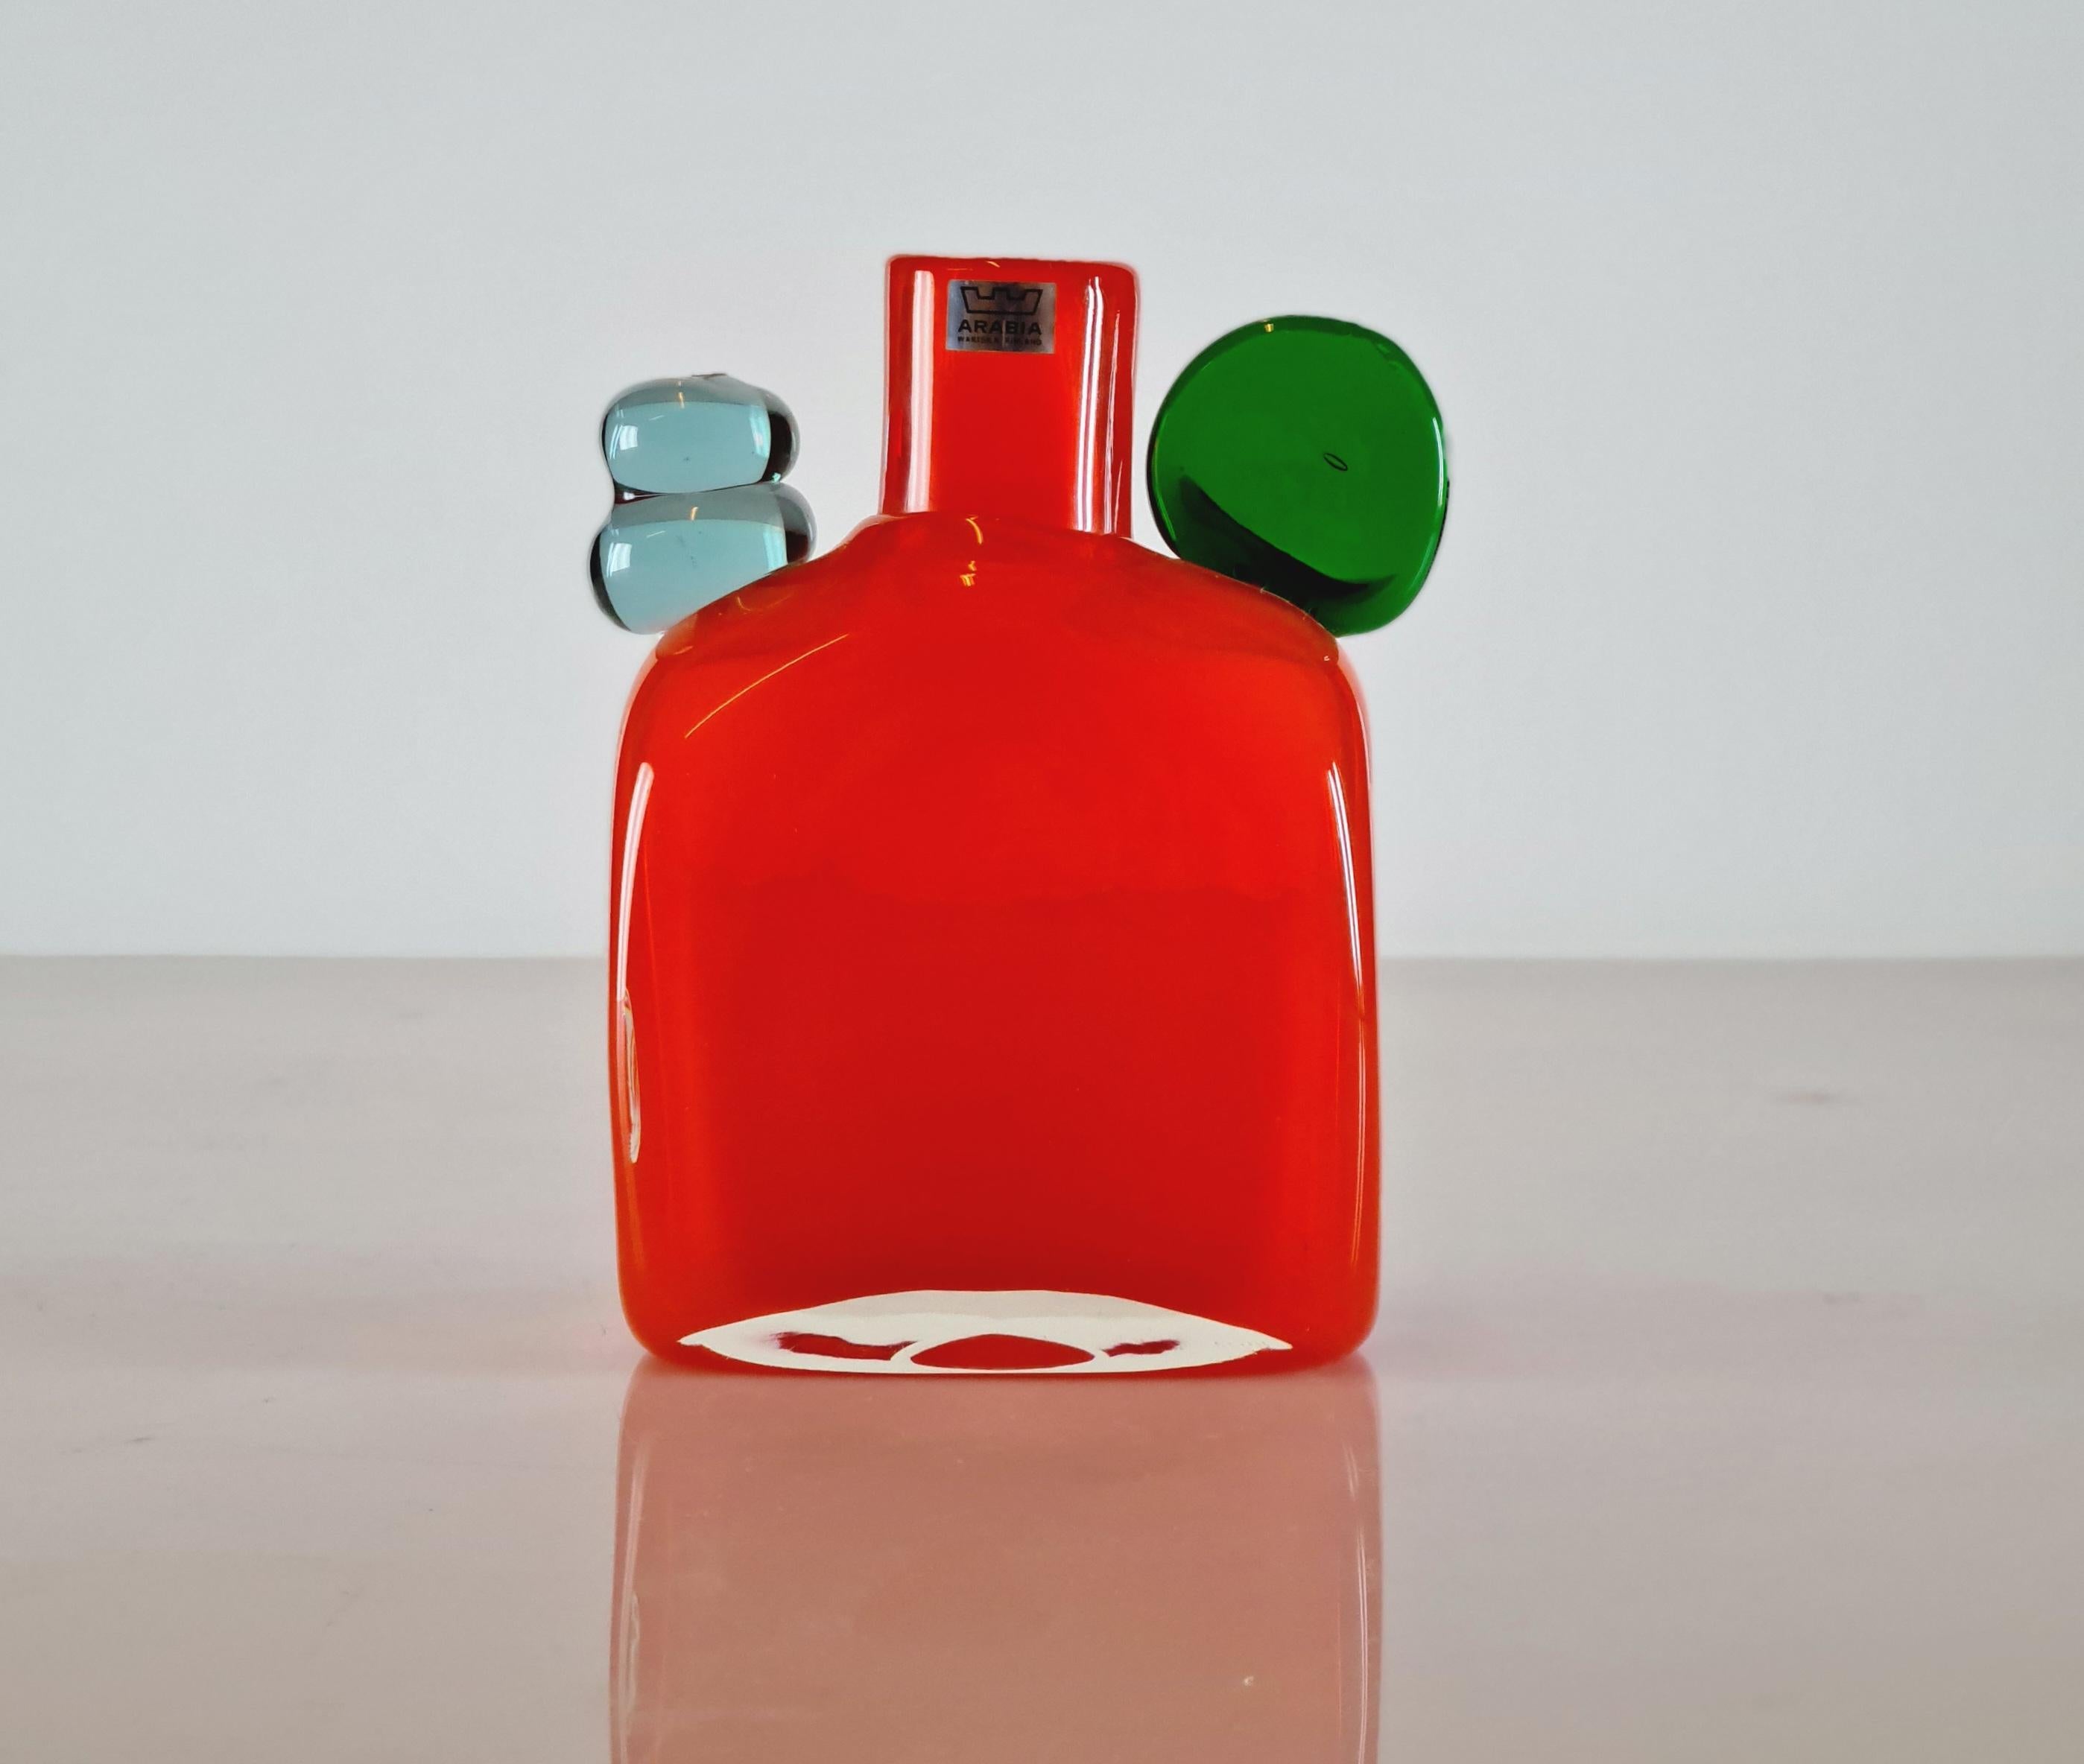 This vibrant orange Pampula bottle with green and light blue details by Oiva Toikka is a perfect decoration on it's own. The overall condition of this playful art  piece is very good and it comes with the Oiva Toikka Nuutajärvi Notsjö inscription.